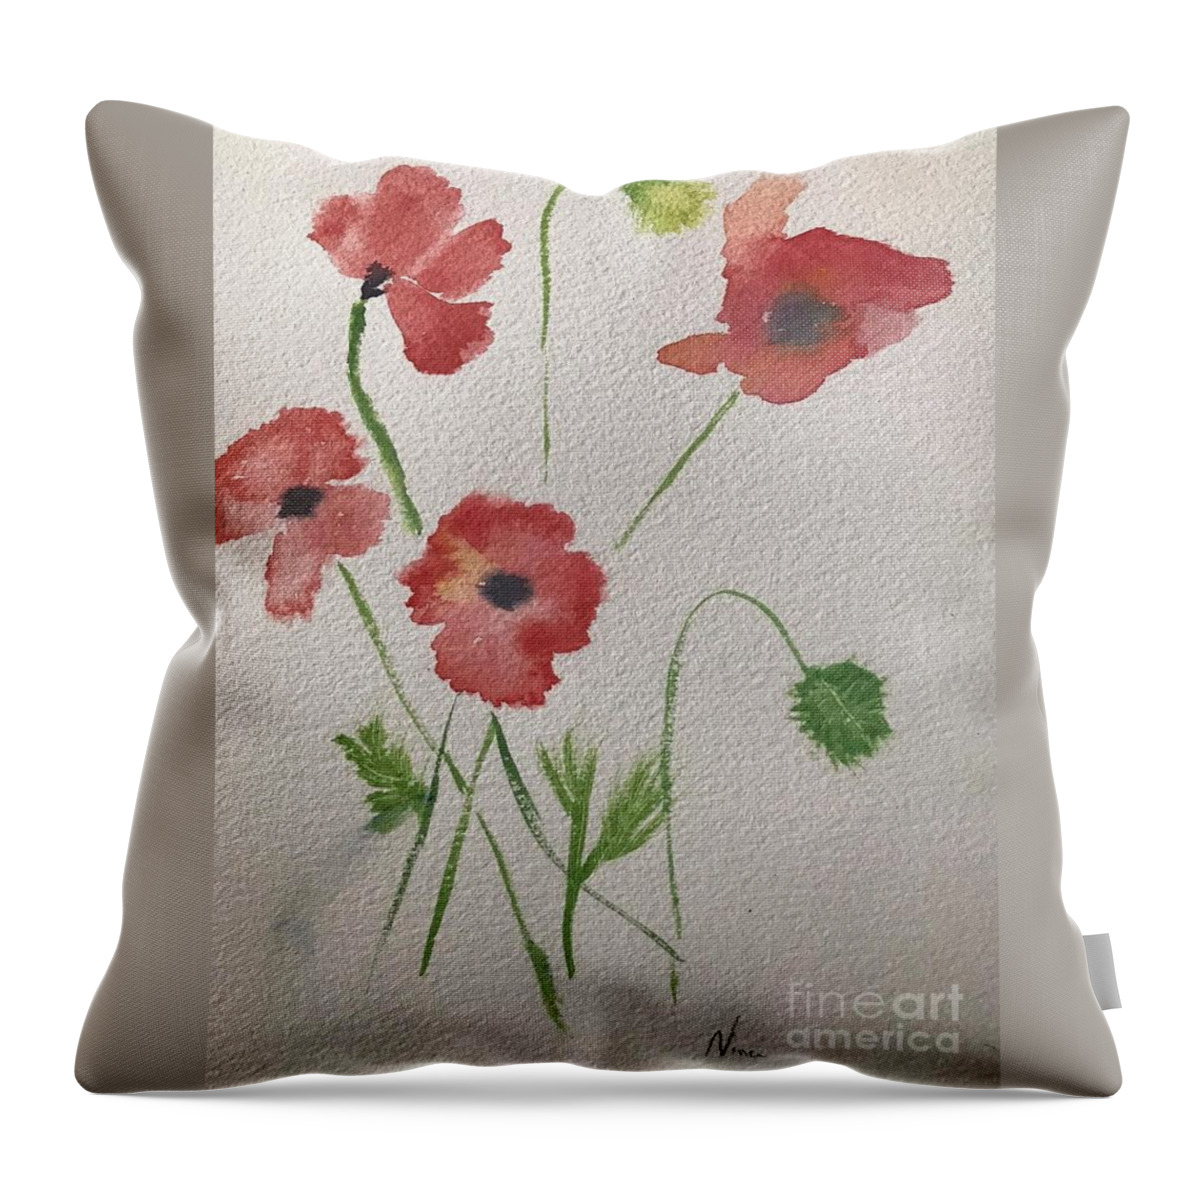 Four Red Poppies Flowers Throw Pillow featuring the painting Four Poppies by Nina Jatania